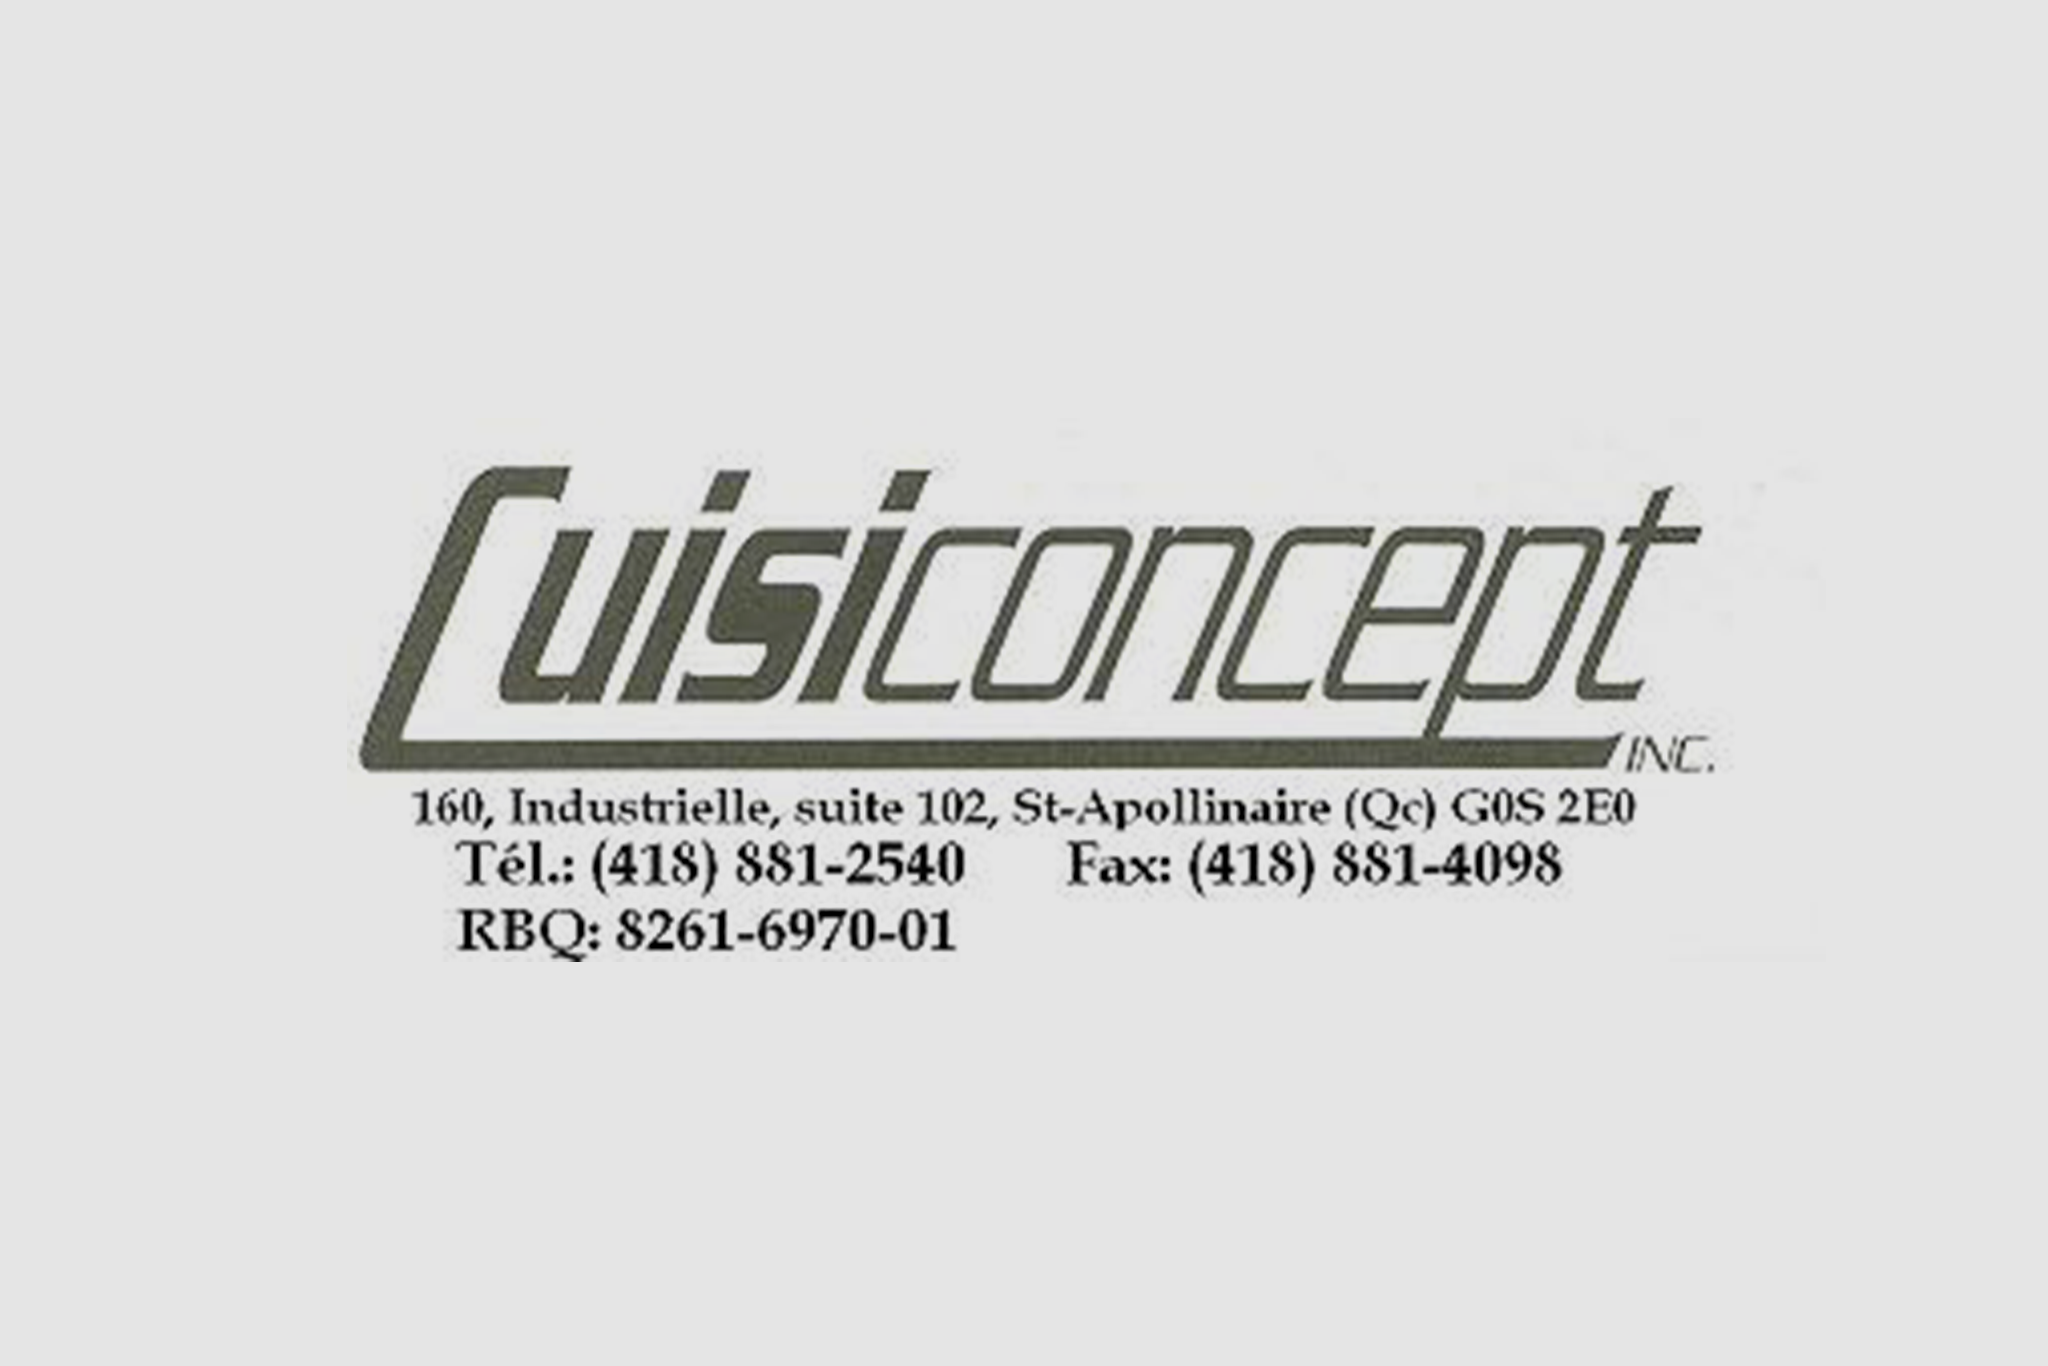 https://www.cuisiconcept.ca/wp-content/uploads/2018/01/Logo-cuisiconcept-2048x1366-1.png